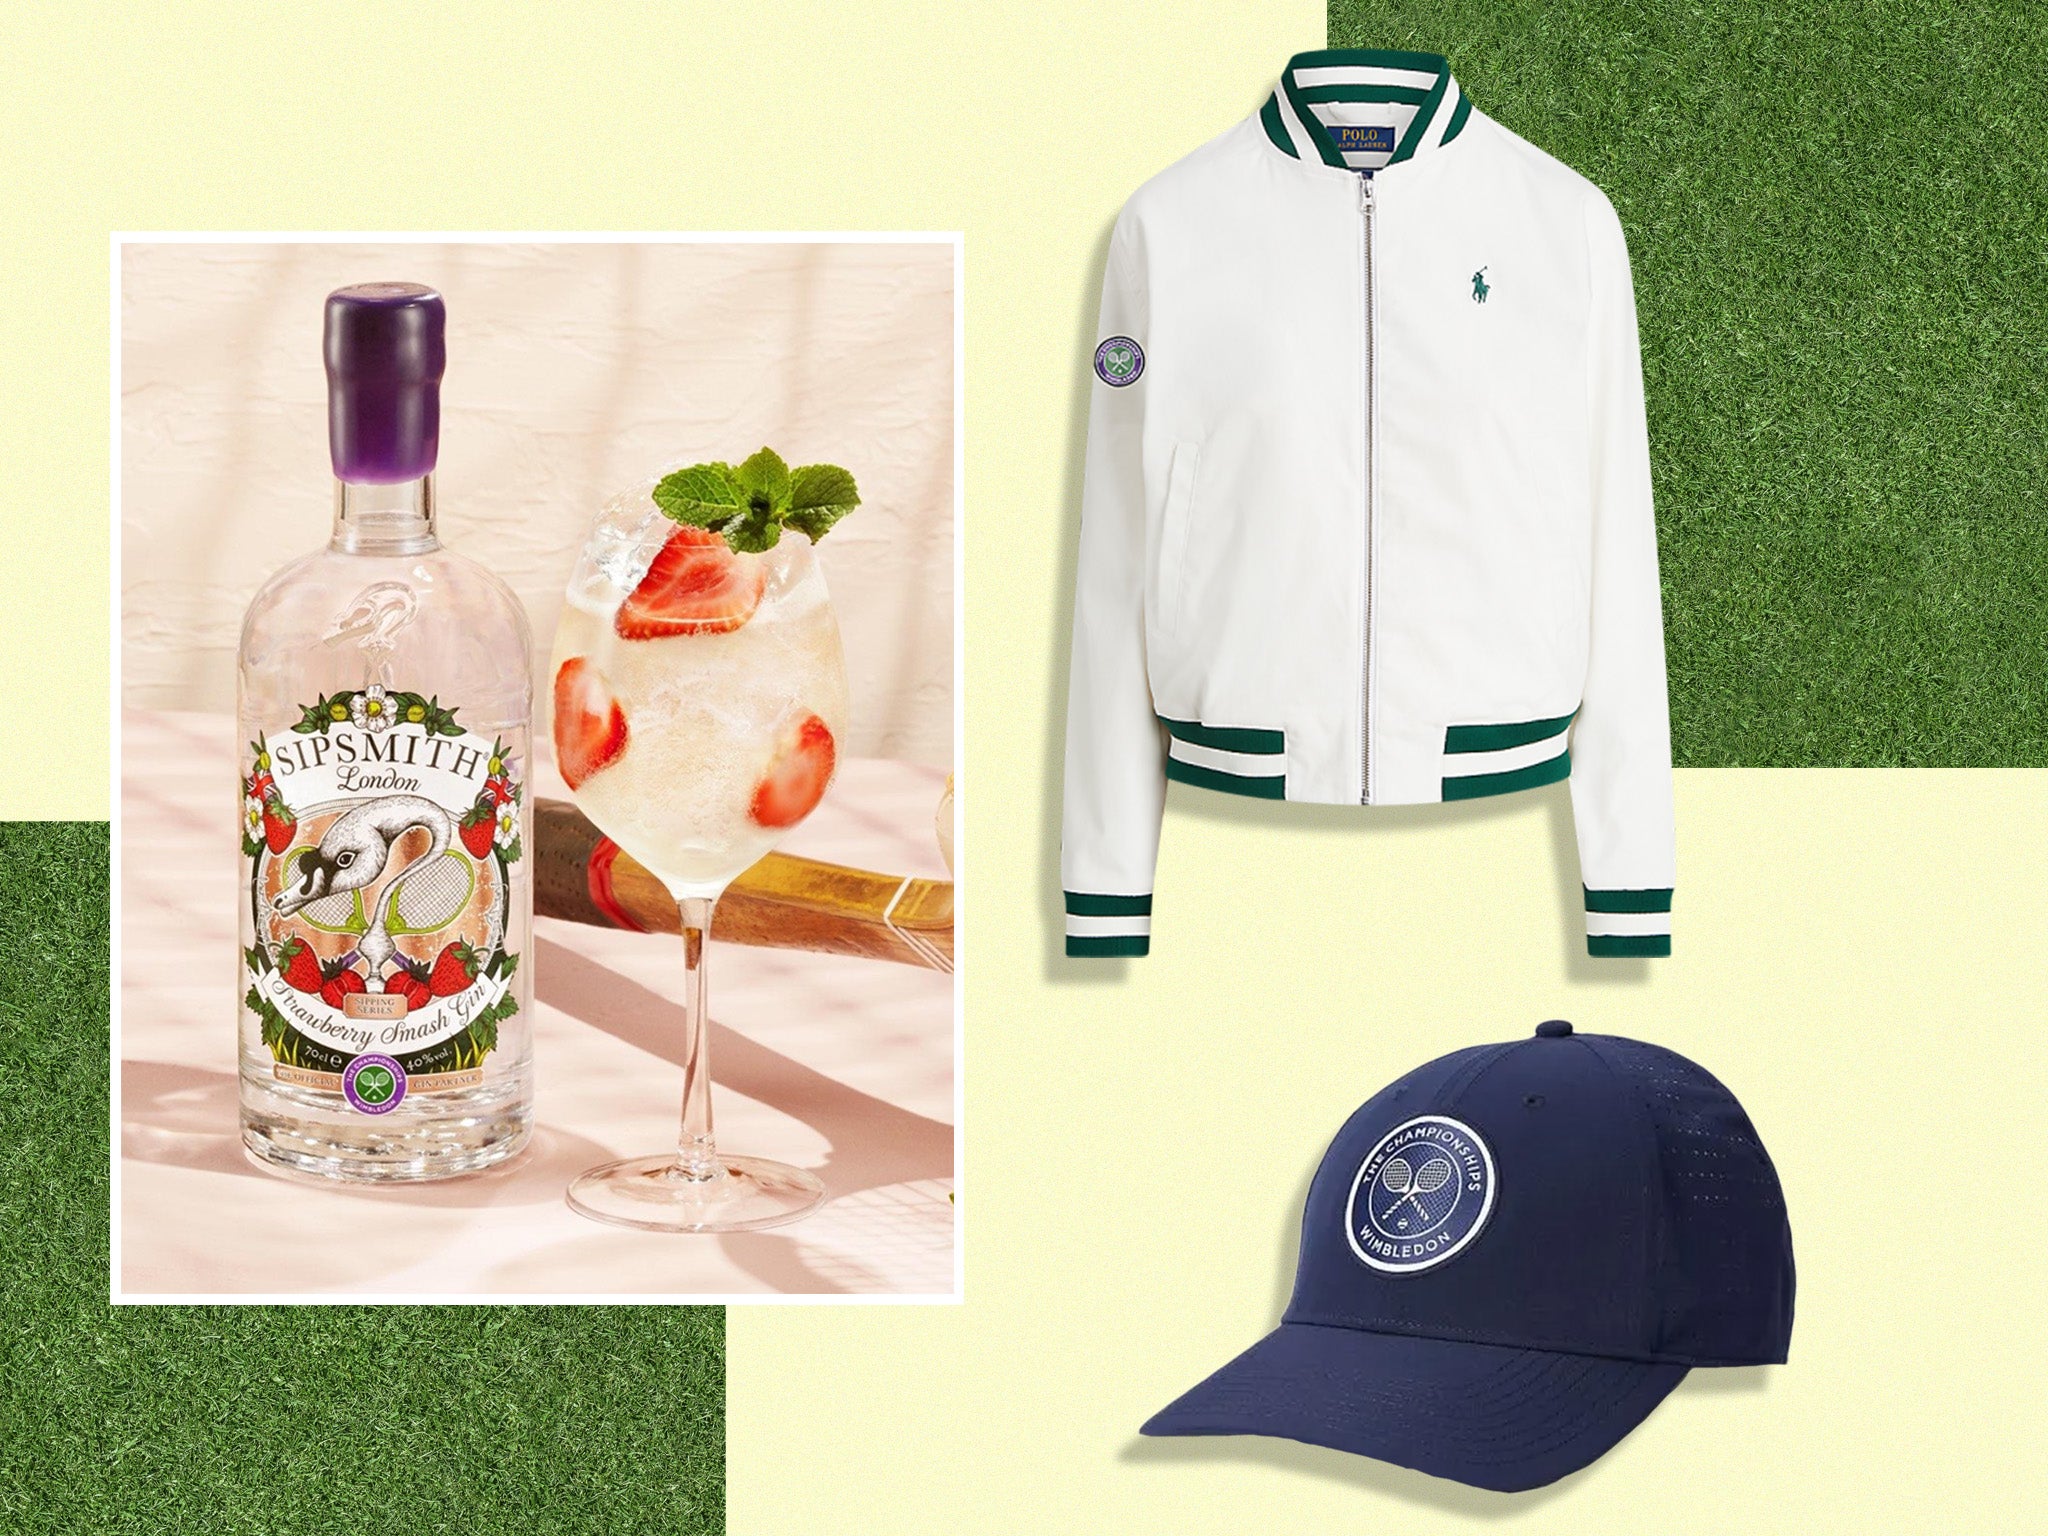 Get in the Grand Slam spirit with branded apparel, Champagne and more ahead of 27 June